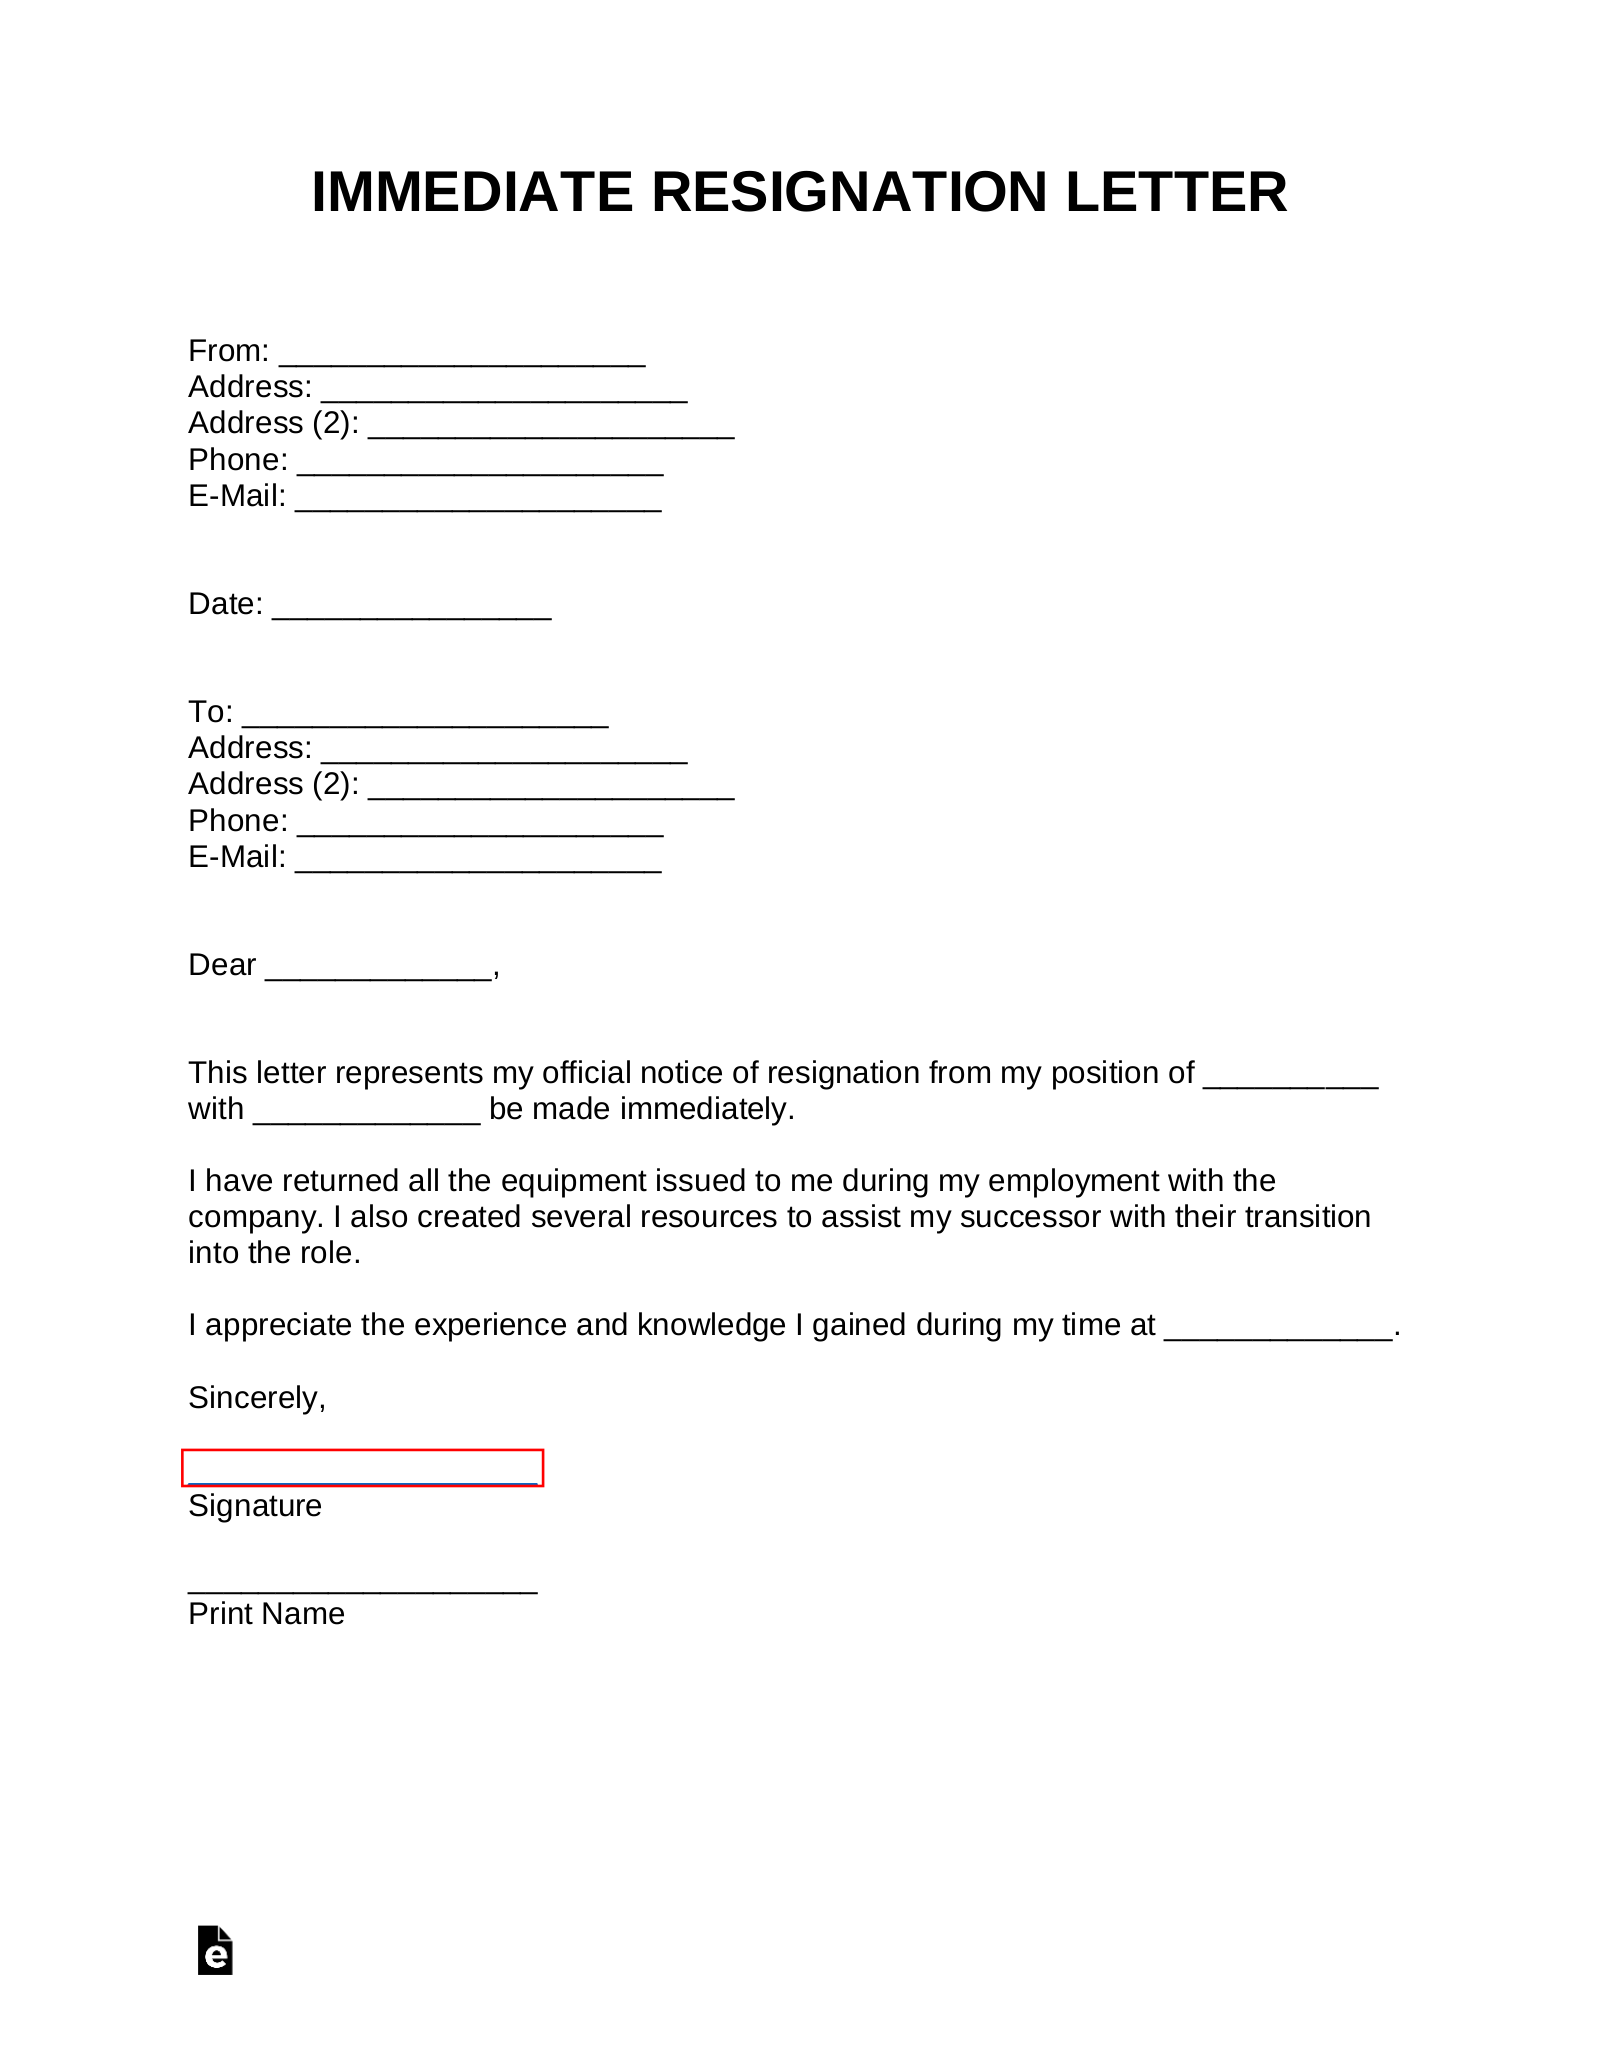 Free Immediate Letter of Resignation Templates Samples PDF Word